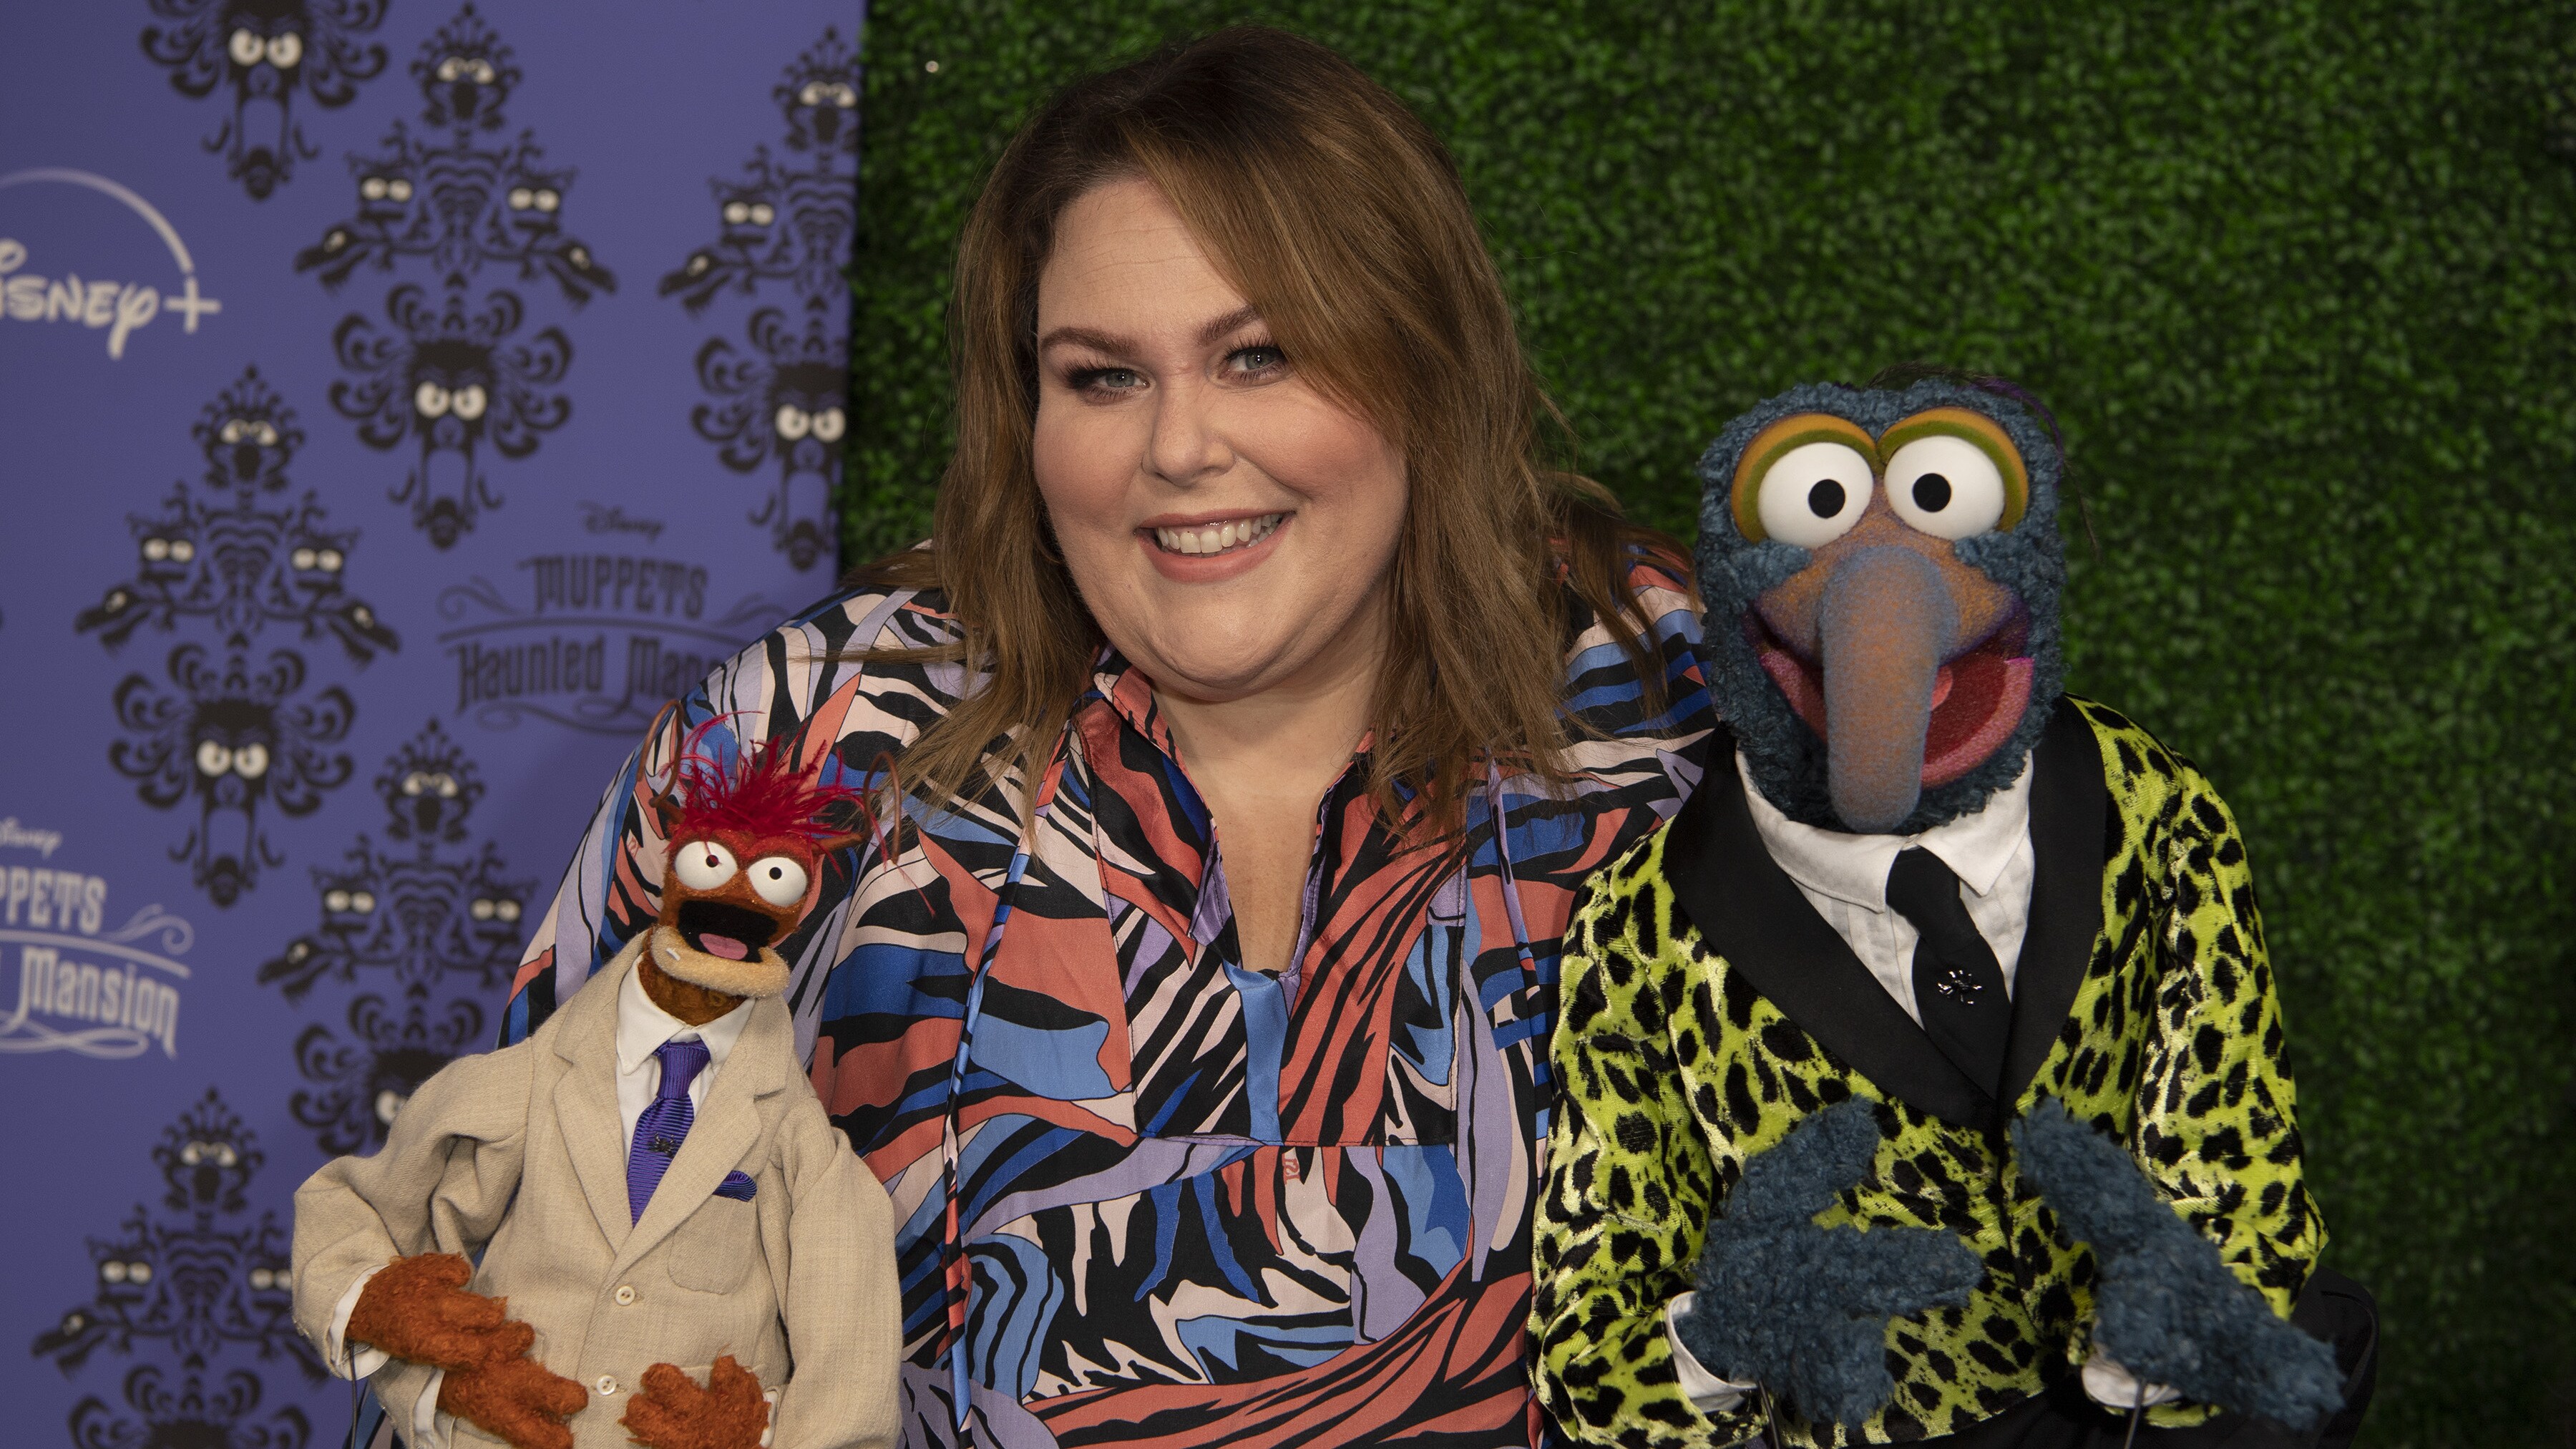 MUPPETS HAUNTED MANSION - Stars of The Muppets first-ever Halloween special "Muppets Haunted Mansion" attended the Drive-In Premiere Event at West Los Angeles College, Thursday, October 7. "Muppets Haunted Mansion" is available to stream Friday, October 8 on Disney+. (Disney/Richard Harbaugh) PEPE THE KING PRAWN, CHRISSY METZ, GONZO